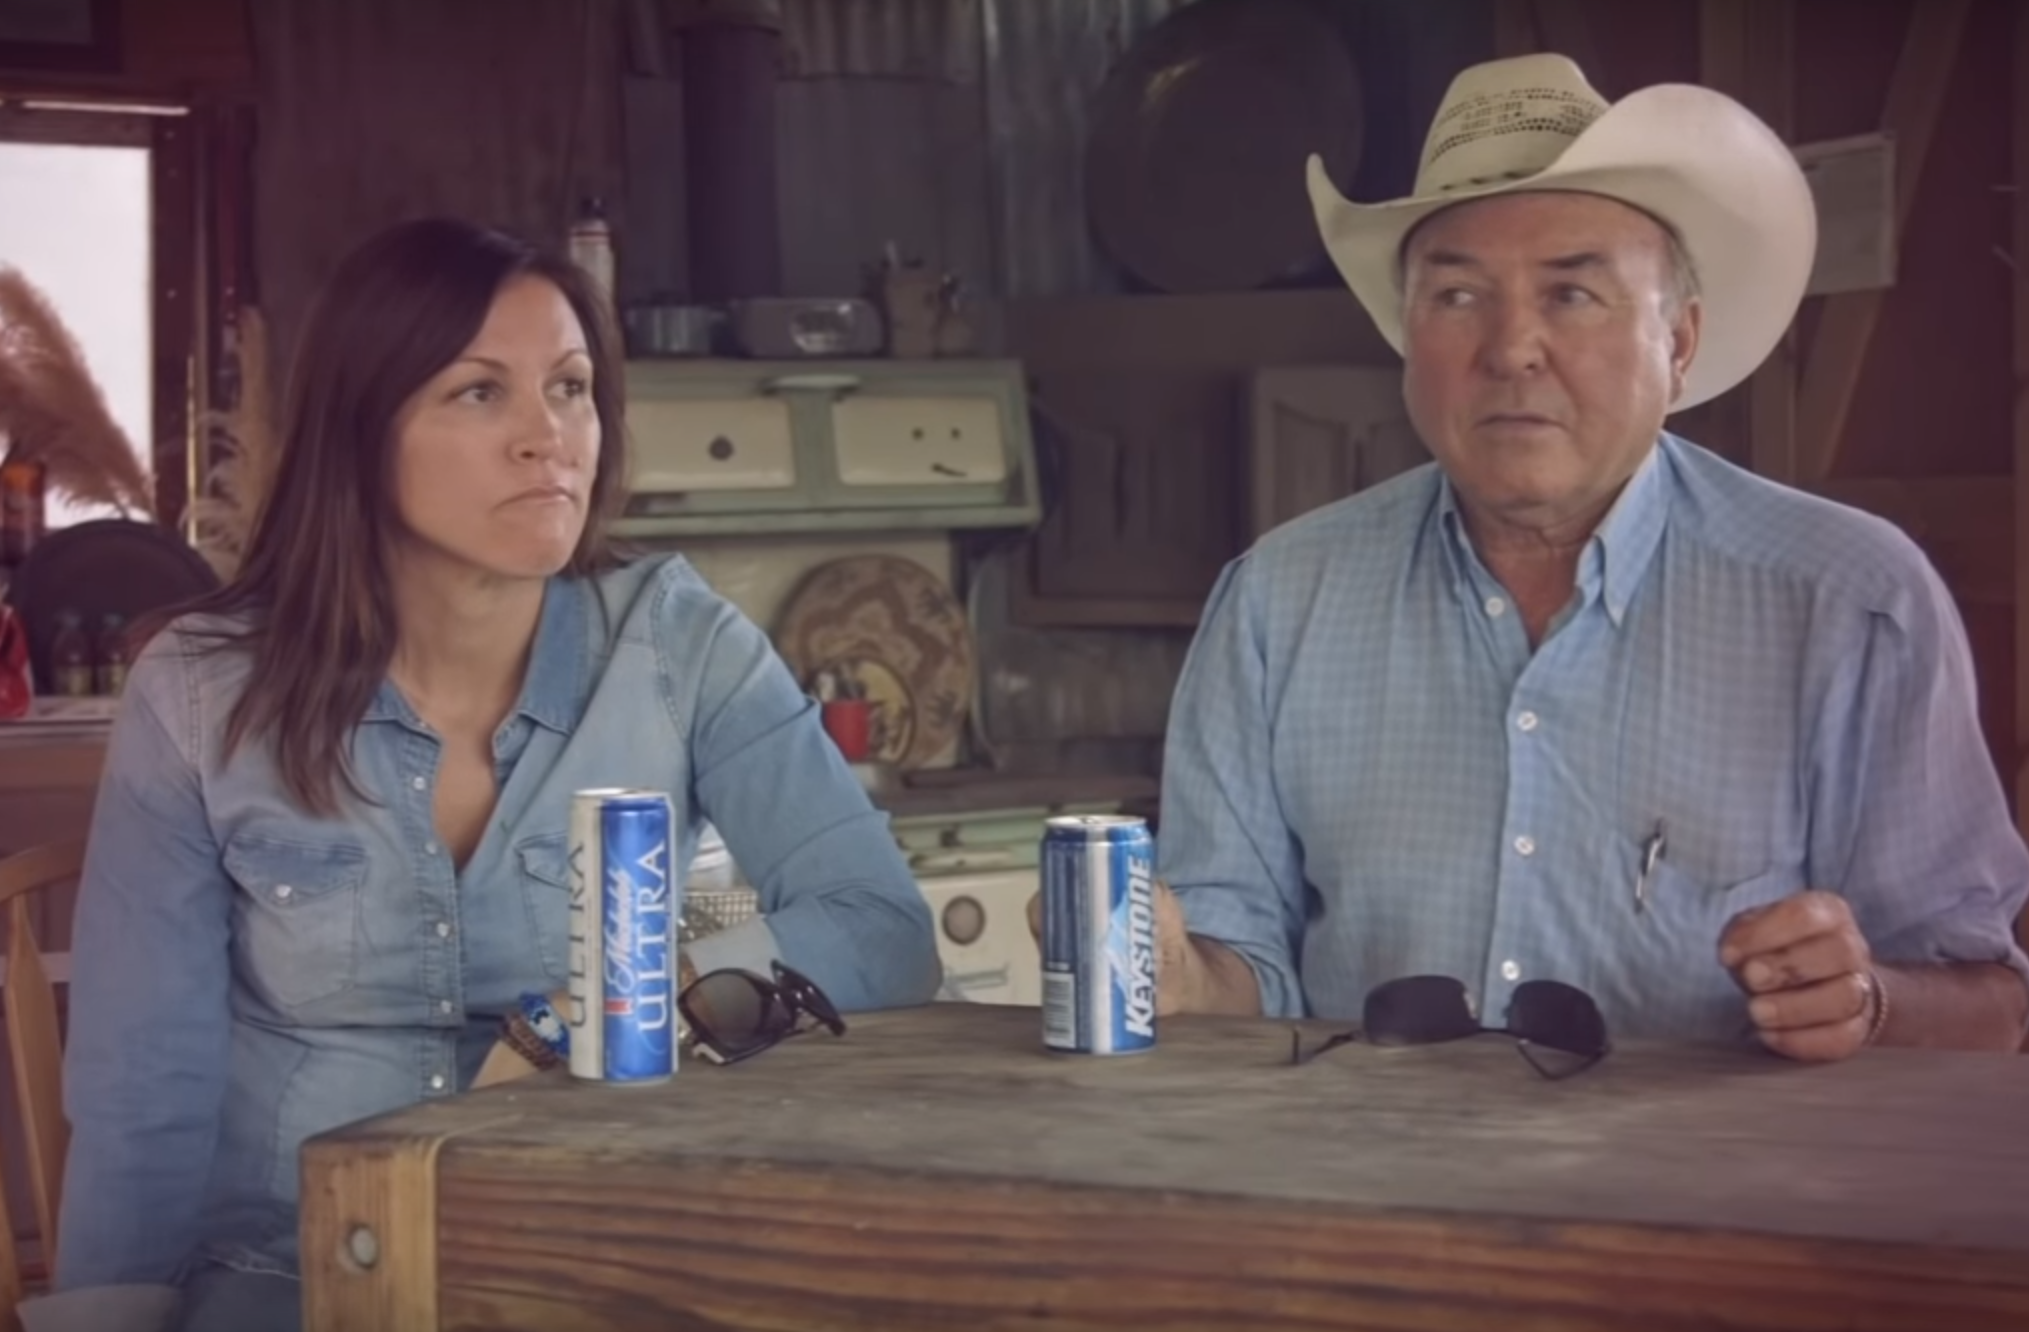 Tara Jackley and Jerry Brown discuss their bull riding community.